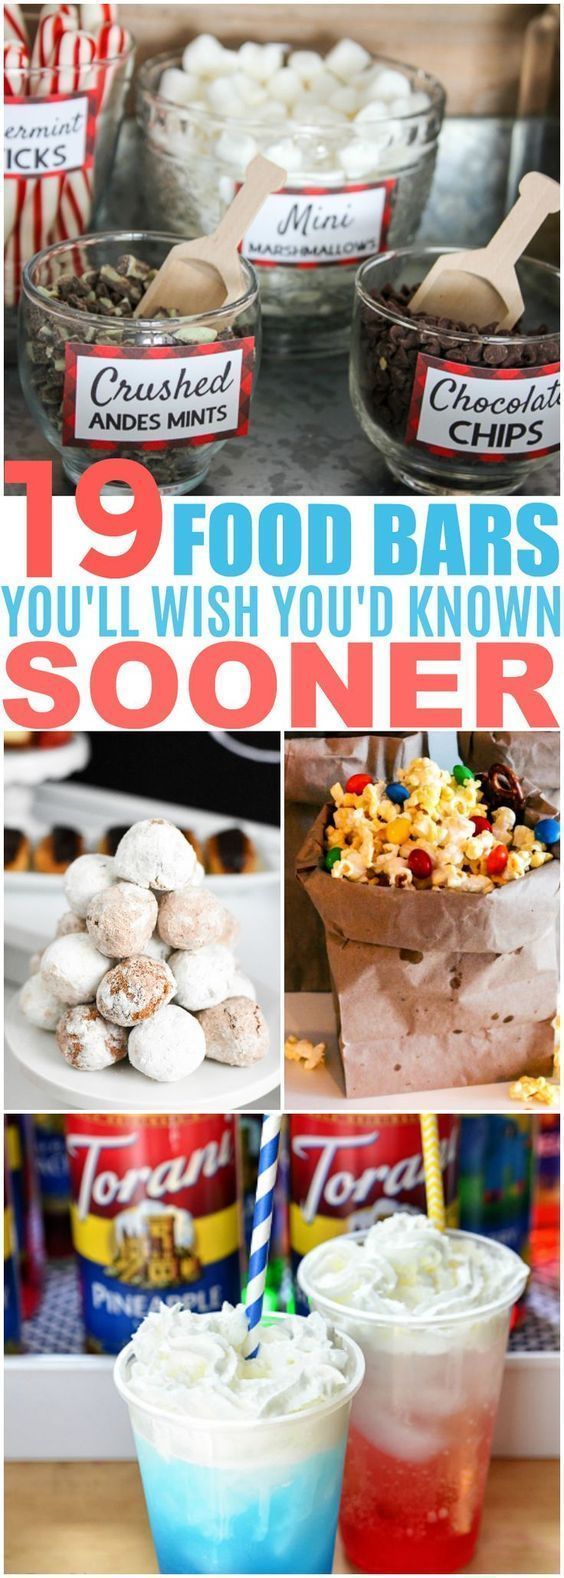 23 Stunning Party Food Bars for Your Next Big Occasion - 23 Stunning Party Food Bars for Your Next Big Occasion -   12 diy Food snacks ideas